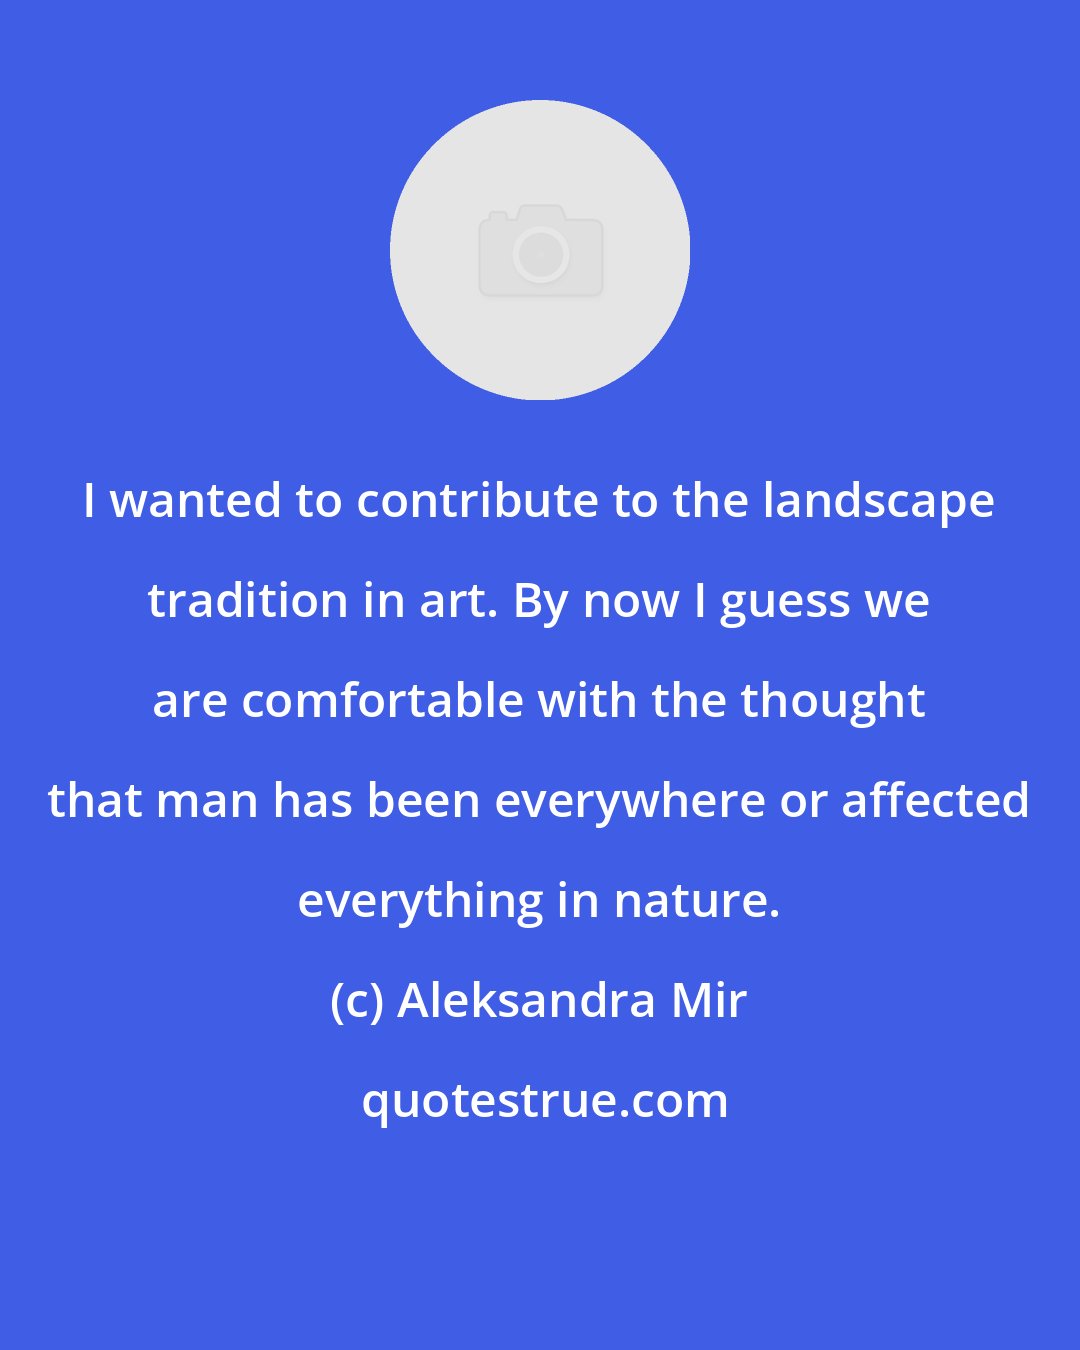 Aleksandra Mir: I wanted to contribute to the landscape tradition in art. By now I guess we are comfortable with the thought that man has been everywhere or affected everything in nature.